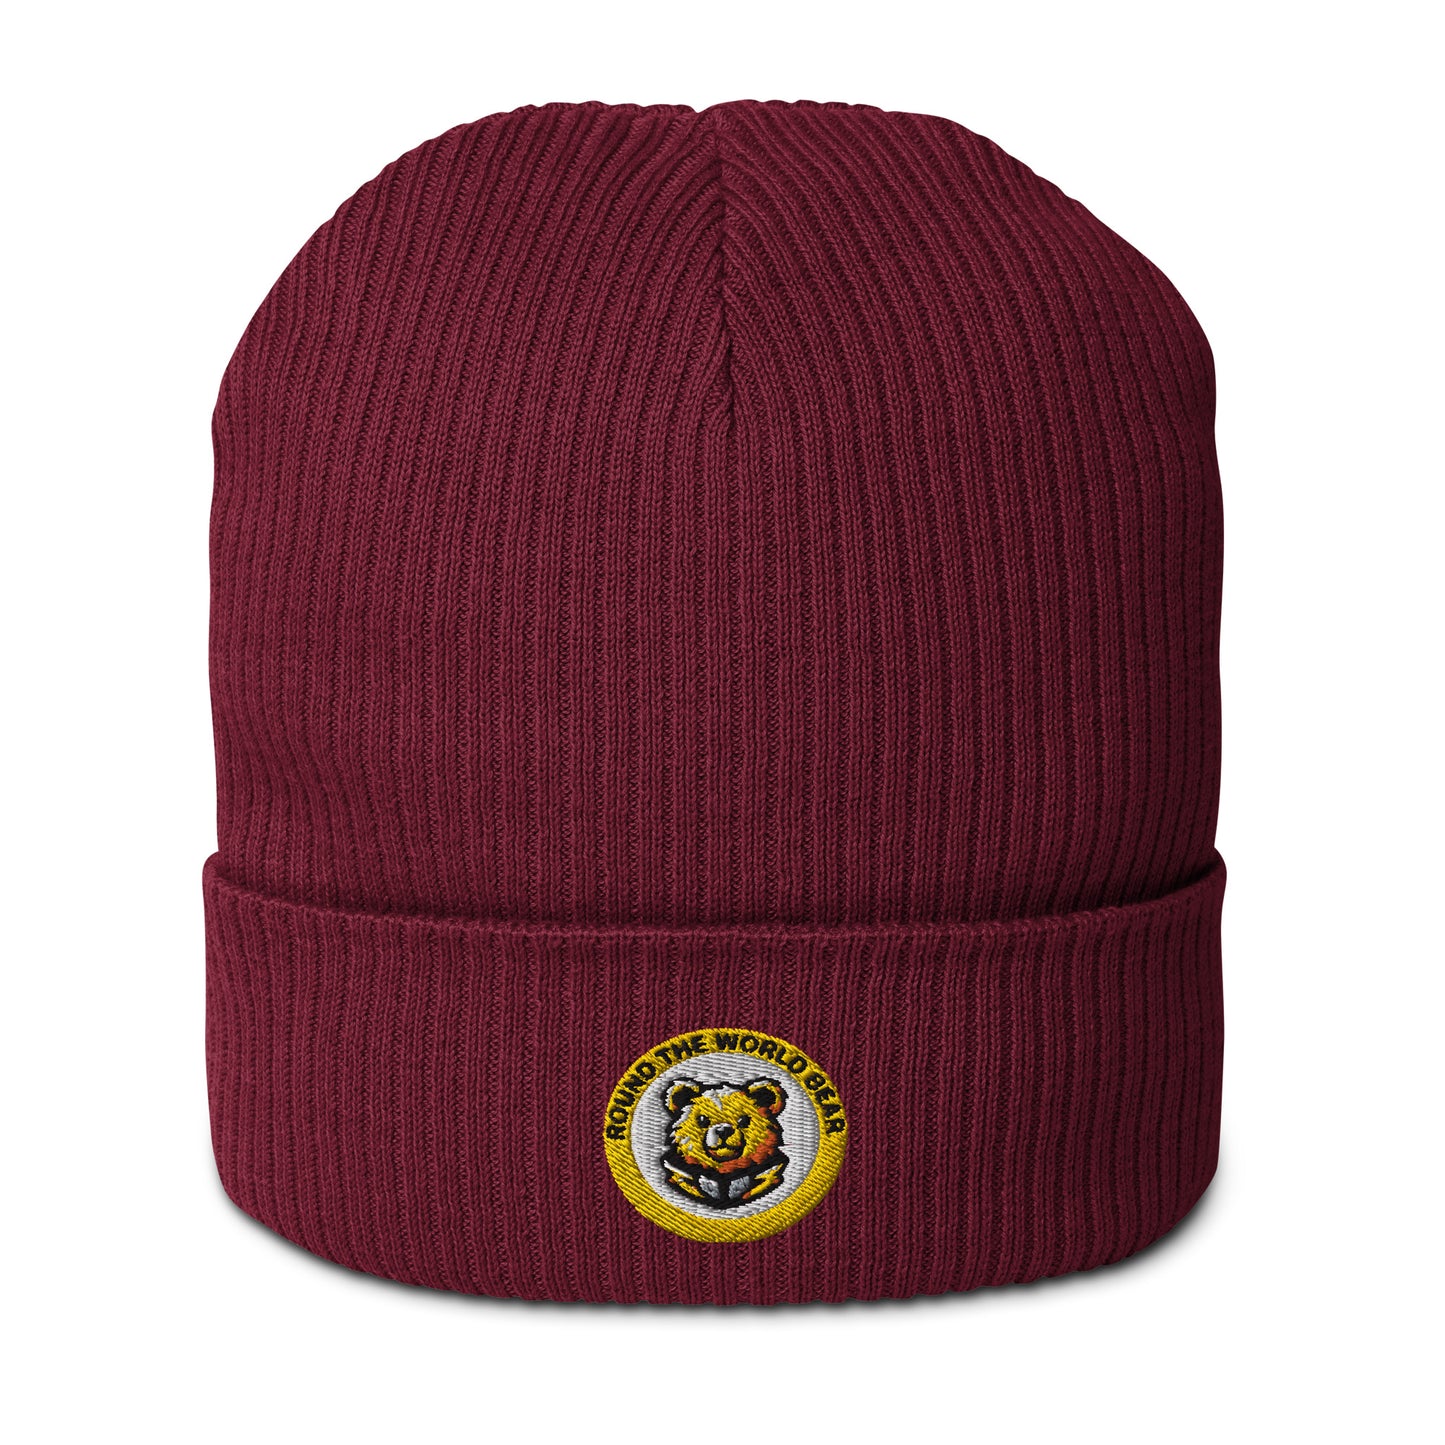 Crew Edition - Embroidered Organic ribbed Beanie